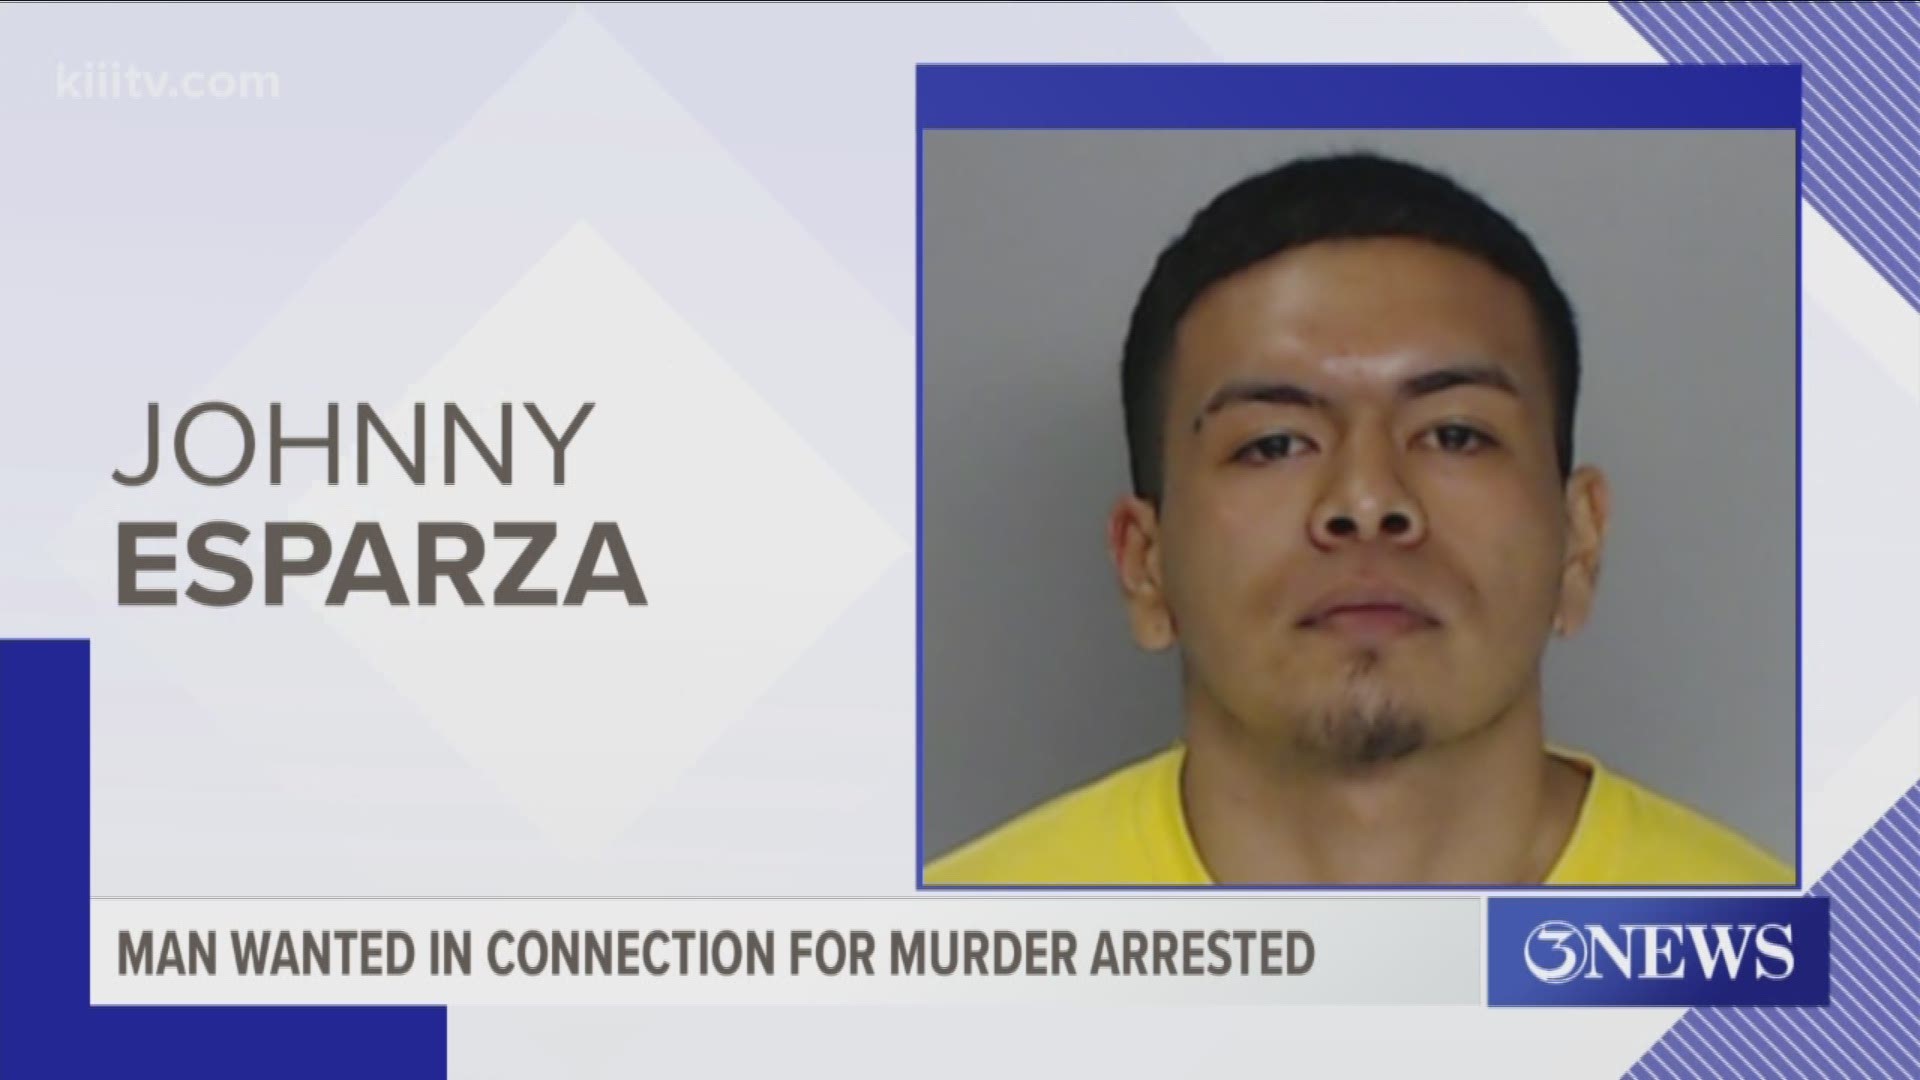 Johnny Esparza has been on the run from the law since he was indicted in June for the murder of 20-year old Parris Tipton. Esparza was captured in Corpus Christi.